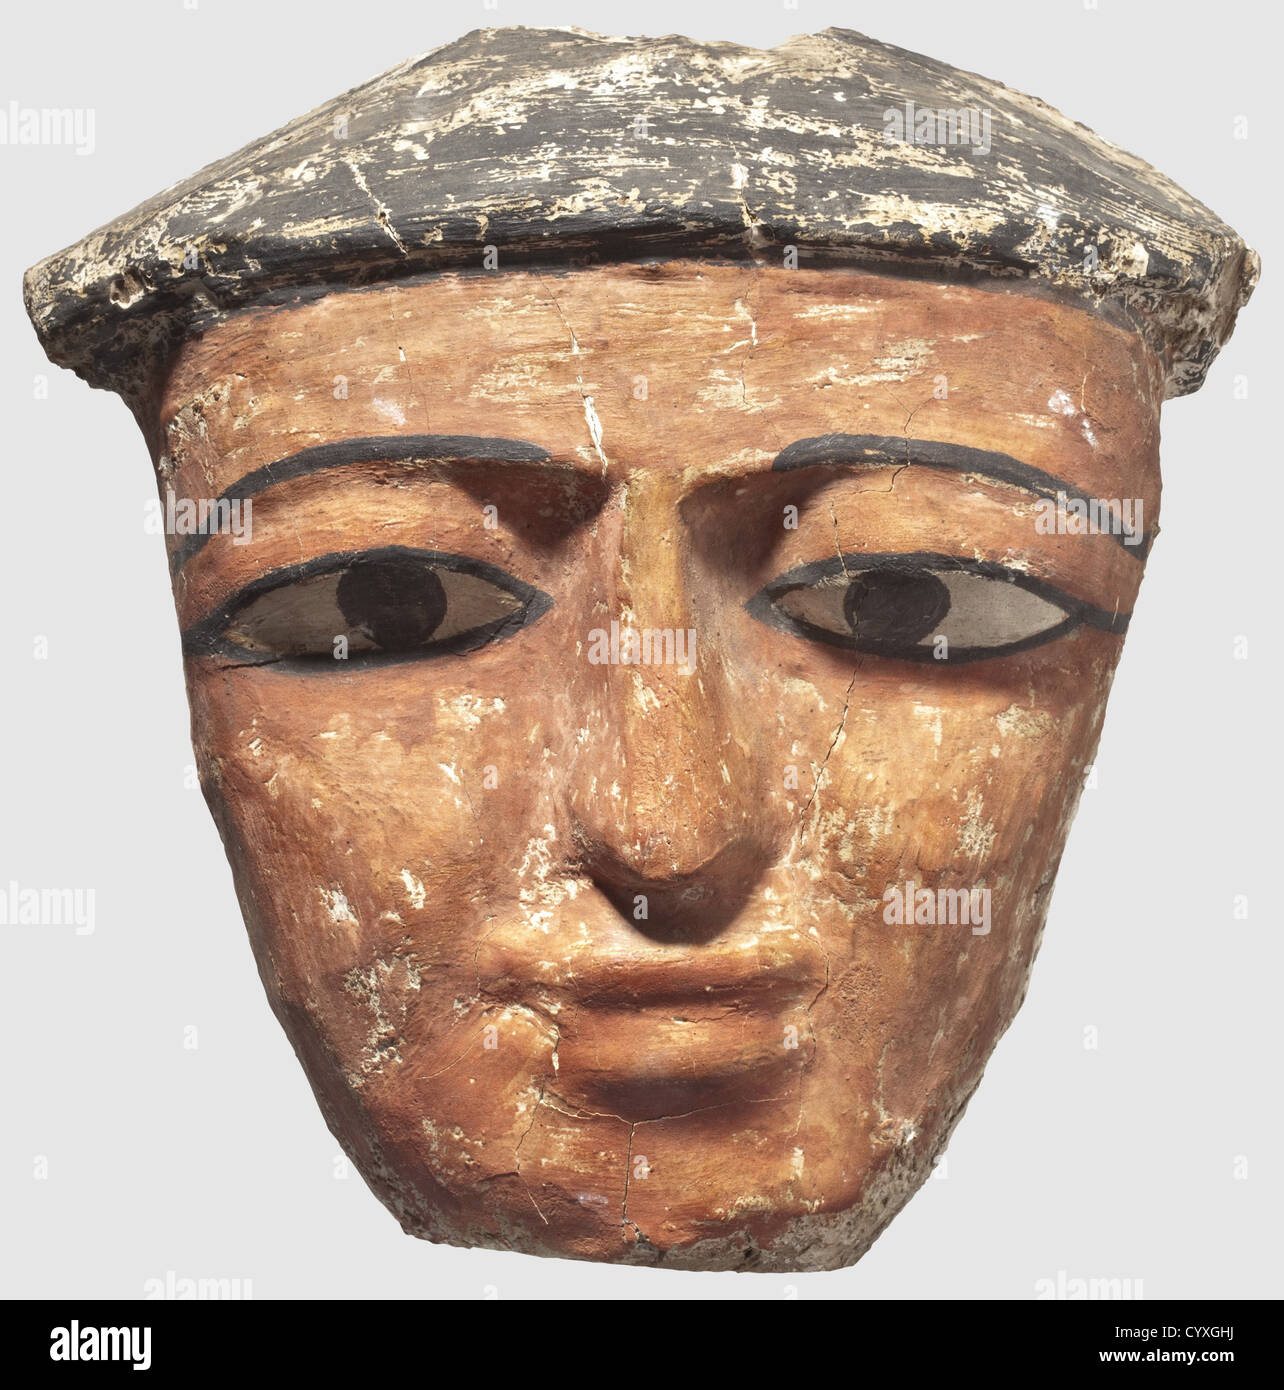 A face fragment from the lid of an Egyptian sarcophagus, Late Period, 7th - 1st century B.C. Wood with a plaster coating painted in colour. Broad male head with a black cowl. There are three dowel holes on the reverse side. Height 22.5 cm. Somewhat worn and minimal flaking. Provenance: Italian art dealer, historic, historical, ancient world, ancient world, ancient times, object, objects, stills, clipping, cut out, cut-out, cut-outs, mediterranean, precious metal, precious metals, Additional-Rights-Clearences-Not Available Stock Photo